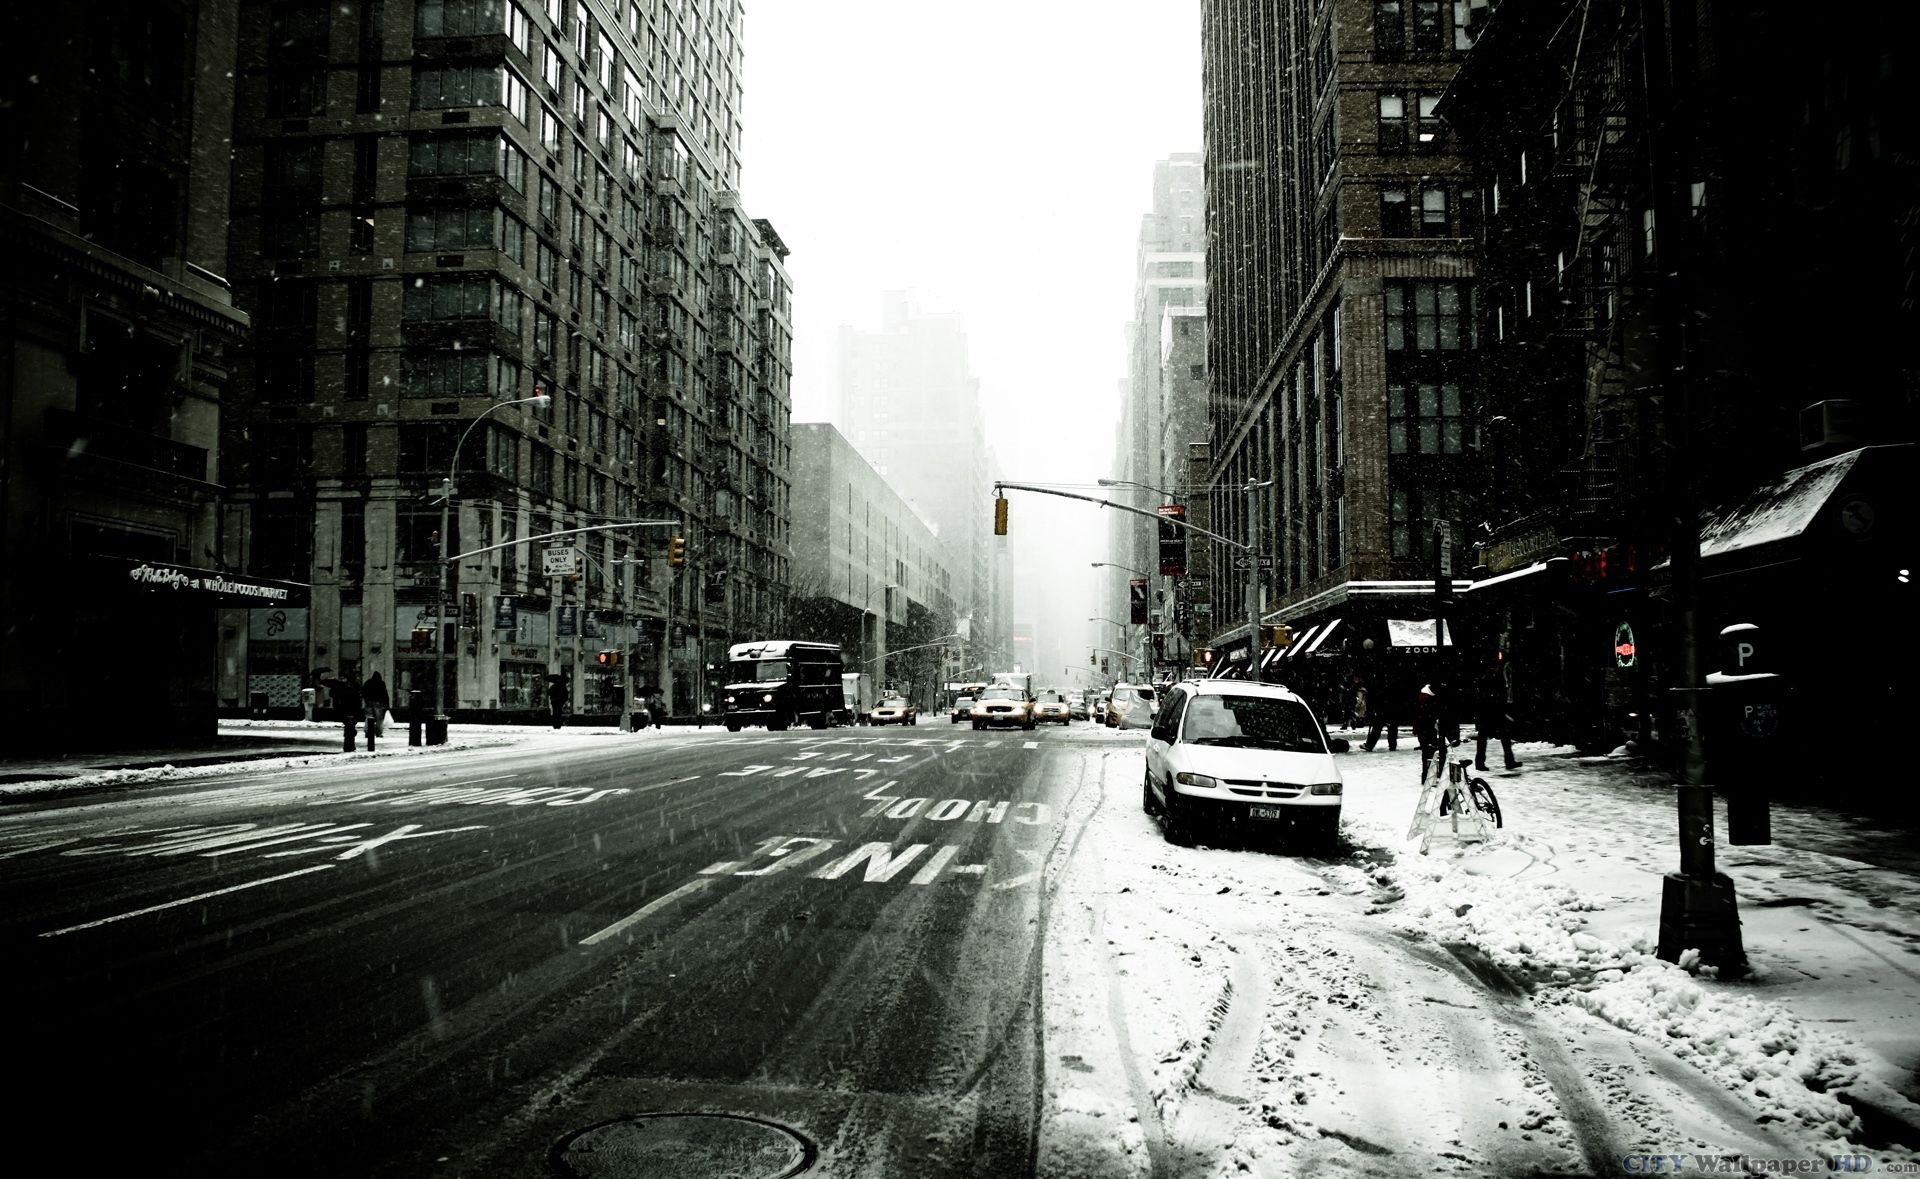 Wallpaper High Resolution Black And White Image Of A Snow Covered New York